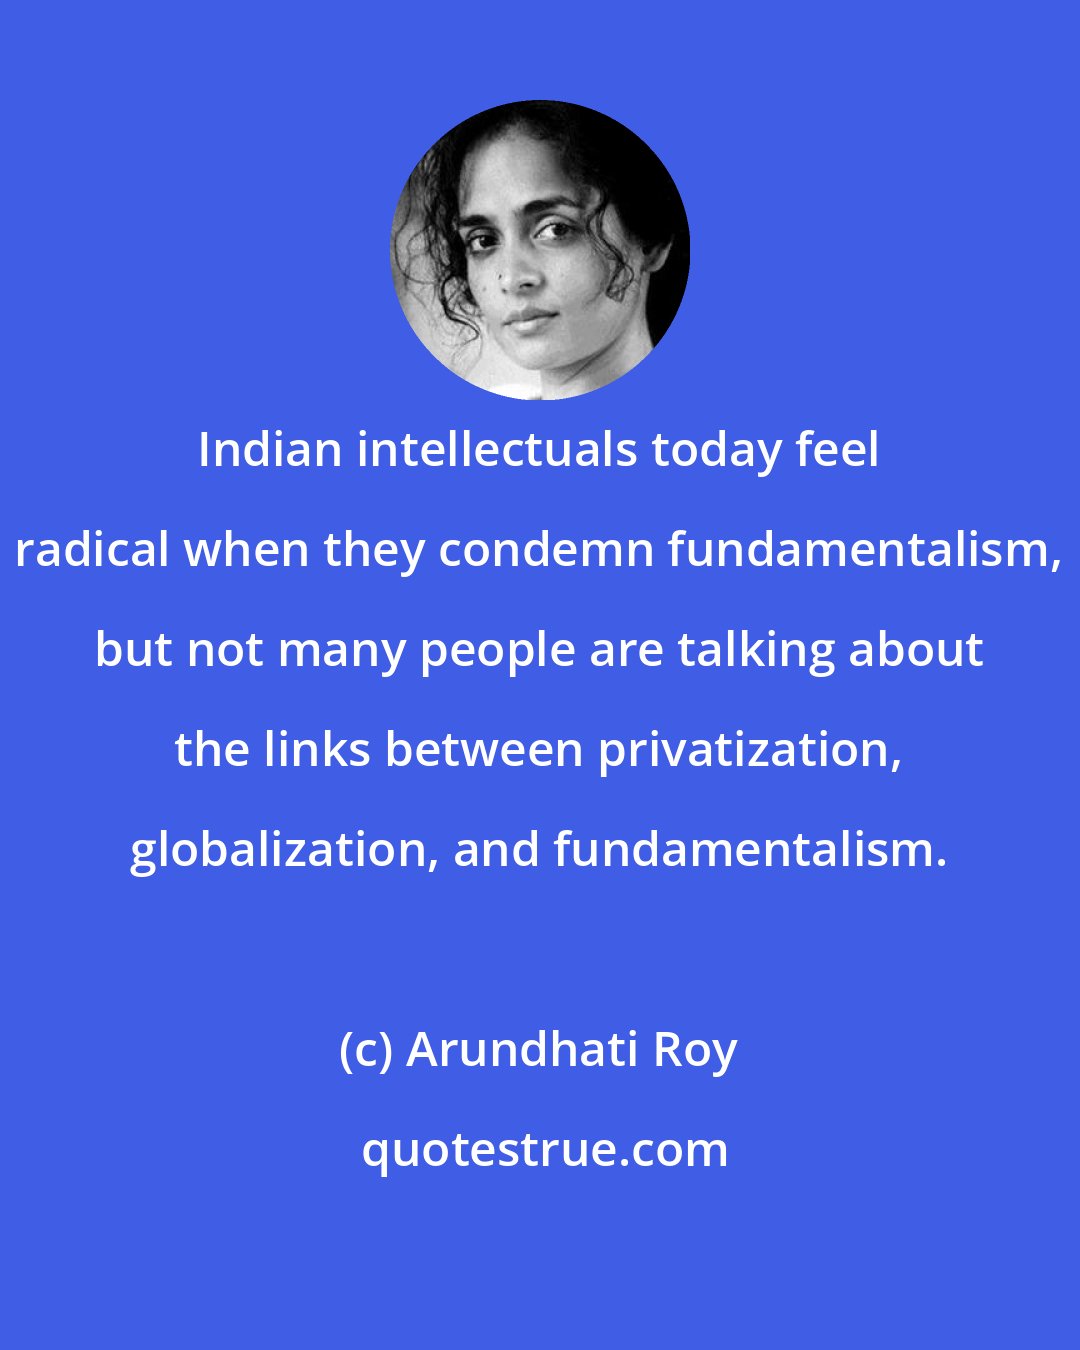 Arundhati Roy: Indian intellectuals today feel radical when they condemn fundamentalism, but not many people are talking about the links between privatization, globalization, and fundamentalism.